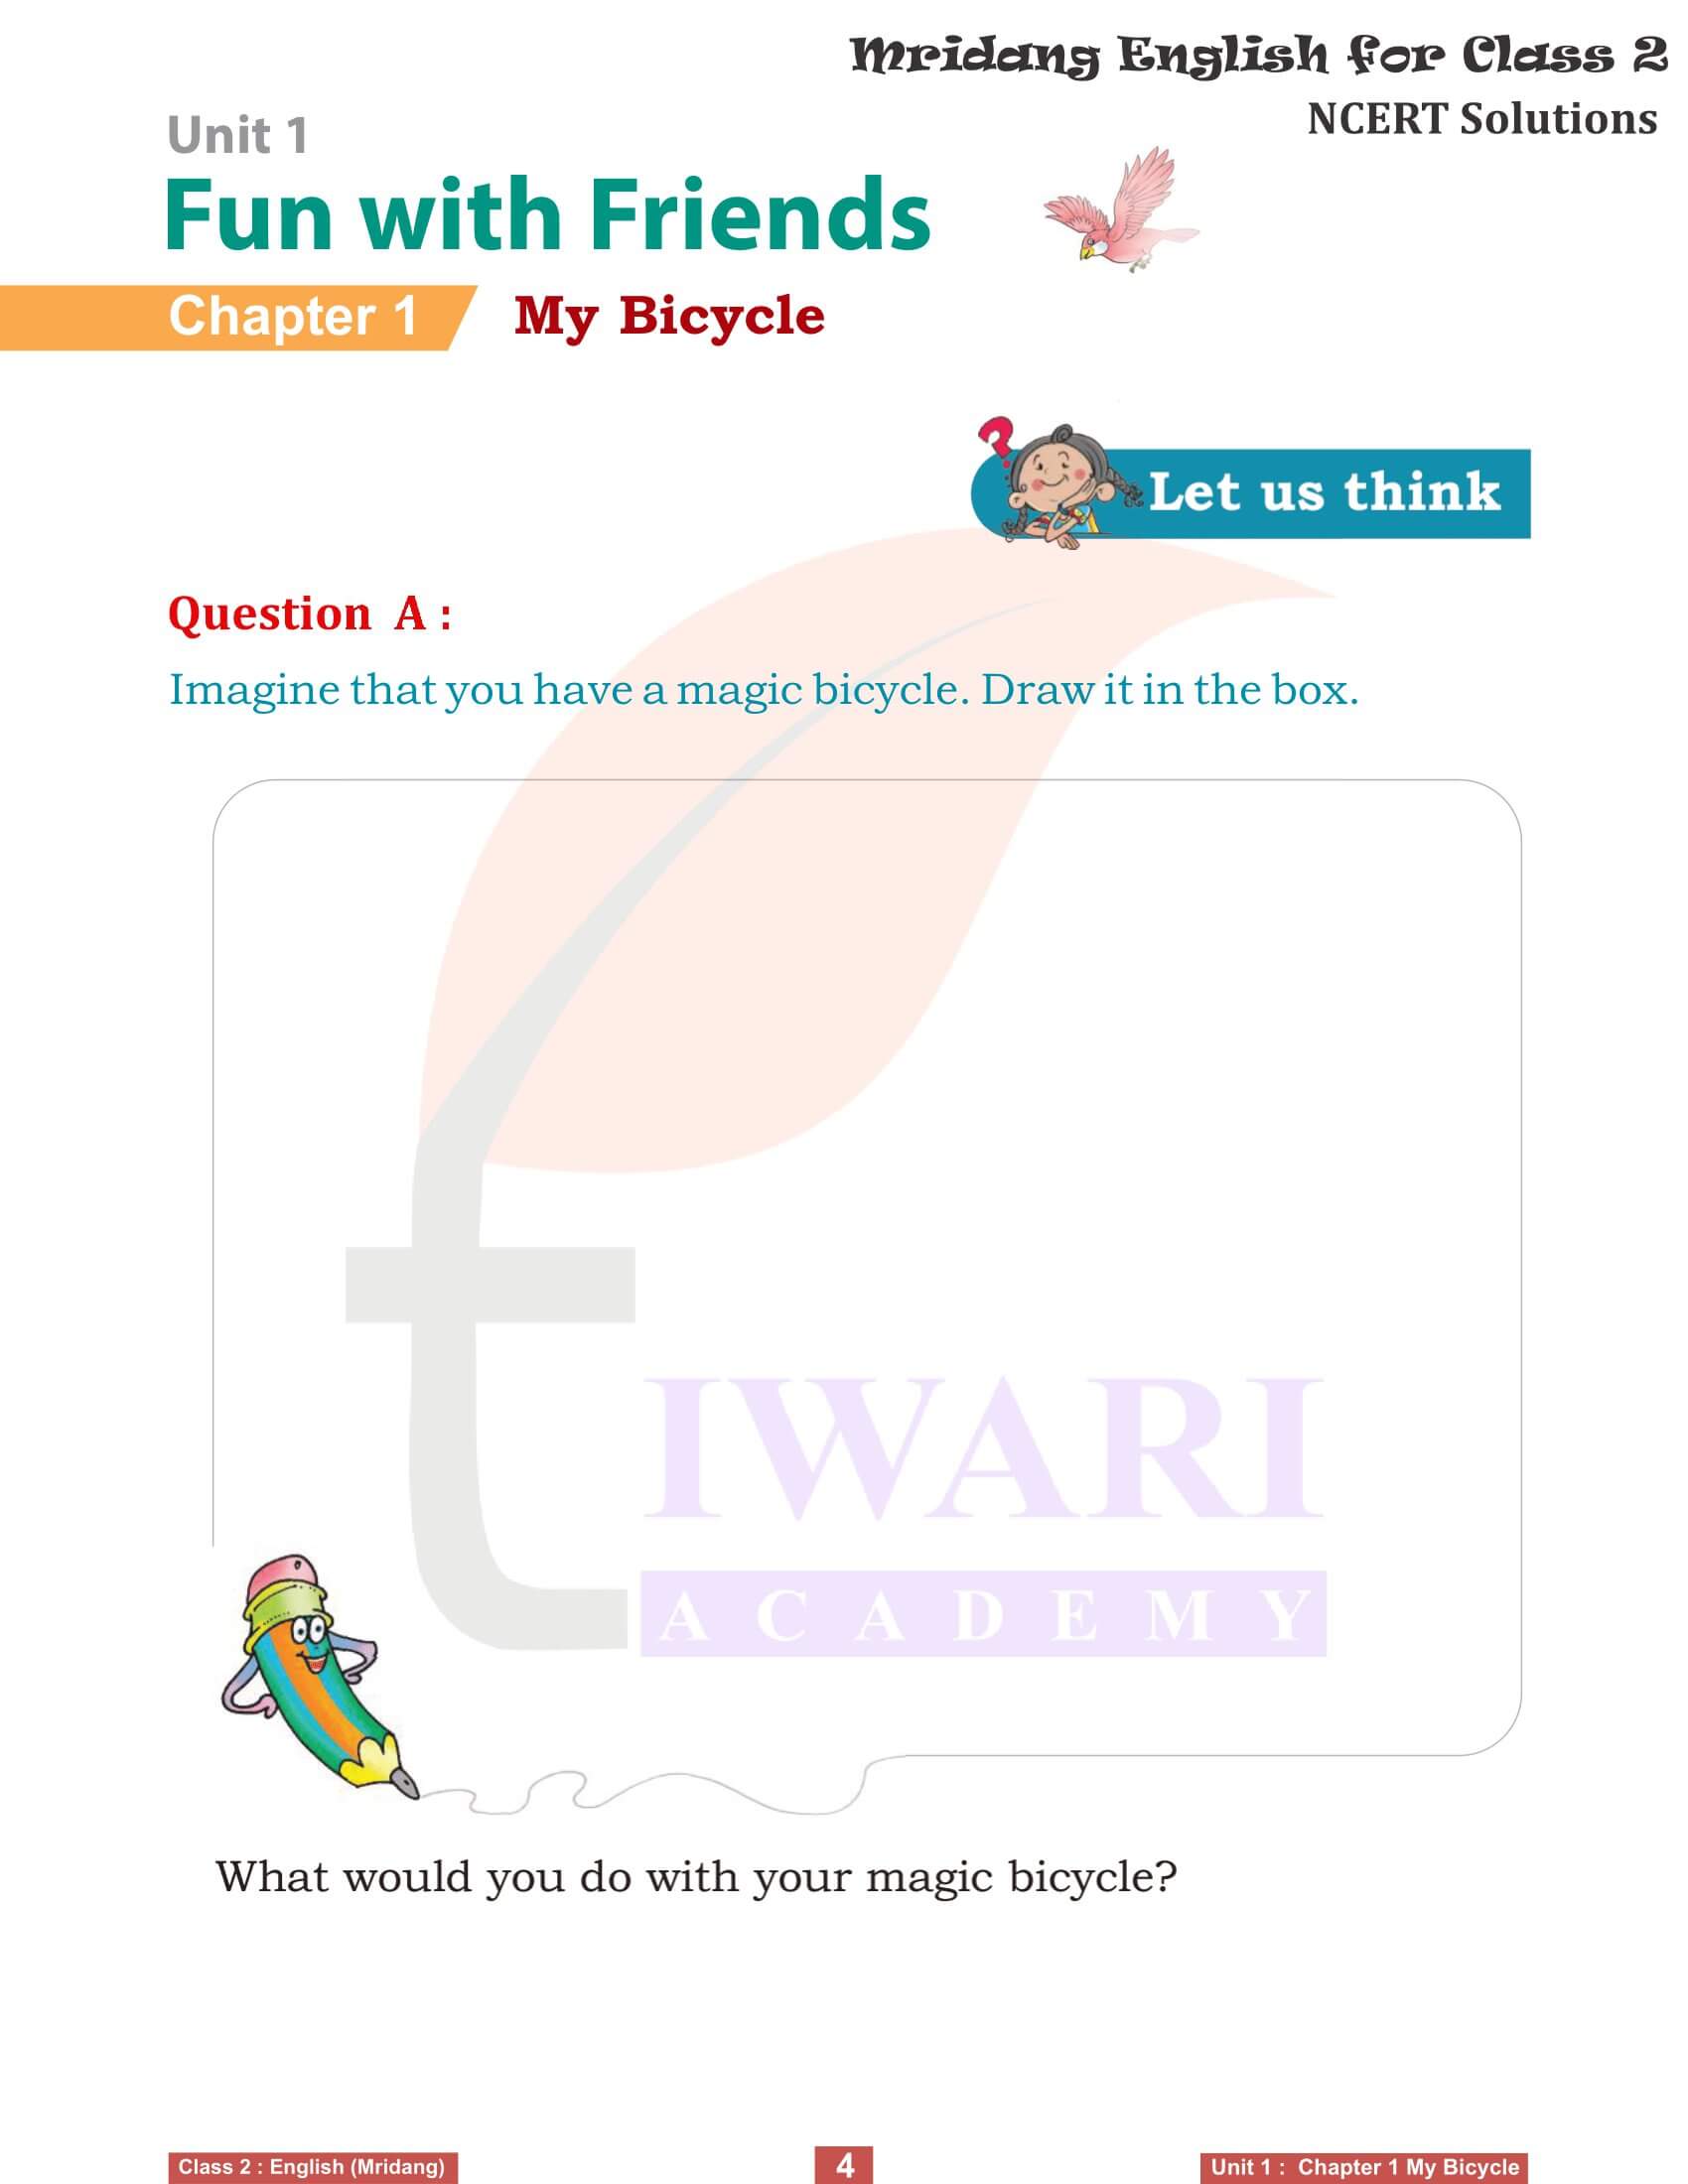 NCERT Solutions for class 2 English Mridang unit 1 Fun with Friends Chapter 1 My Bicycle Answers